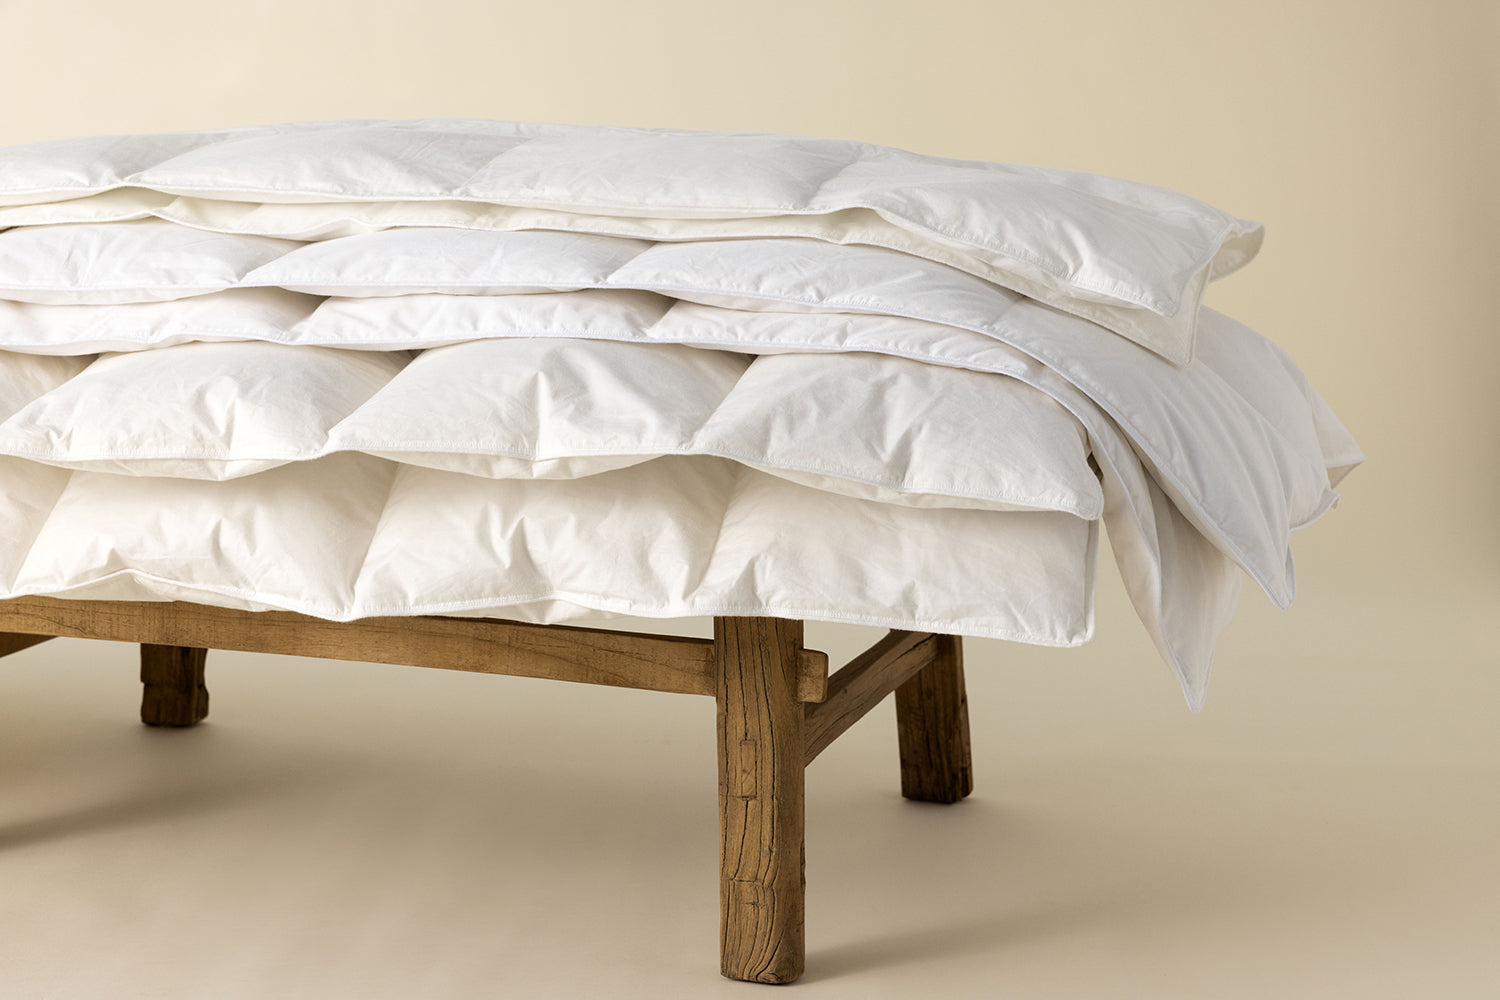 natural duvet laying on a wooden bench